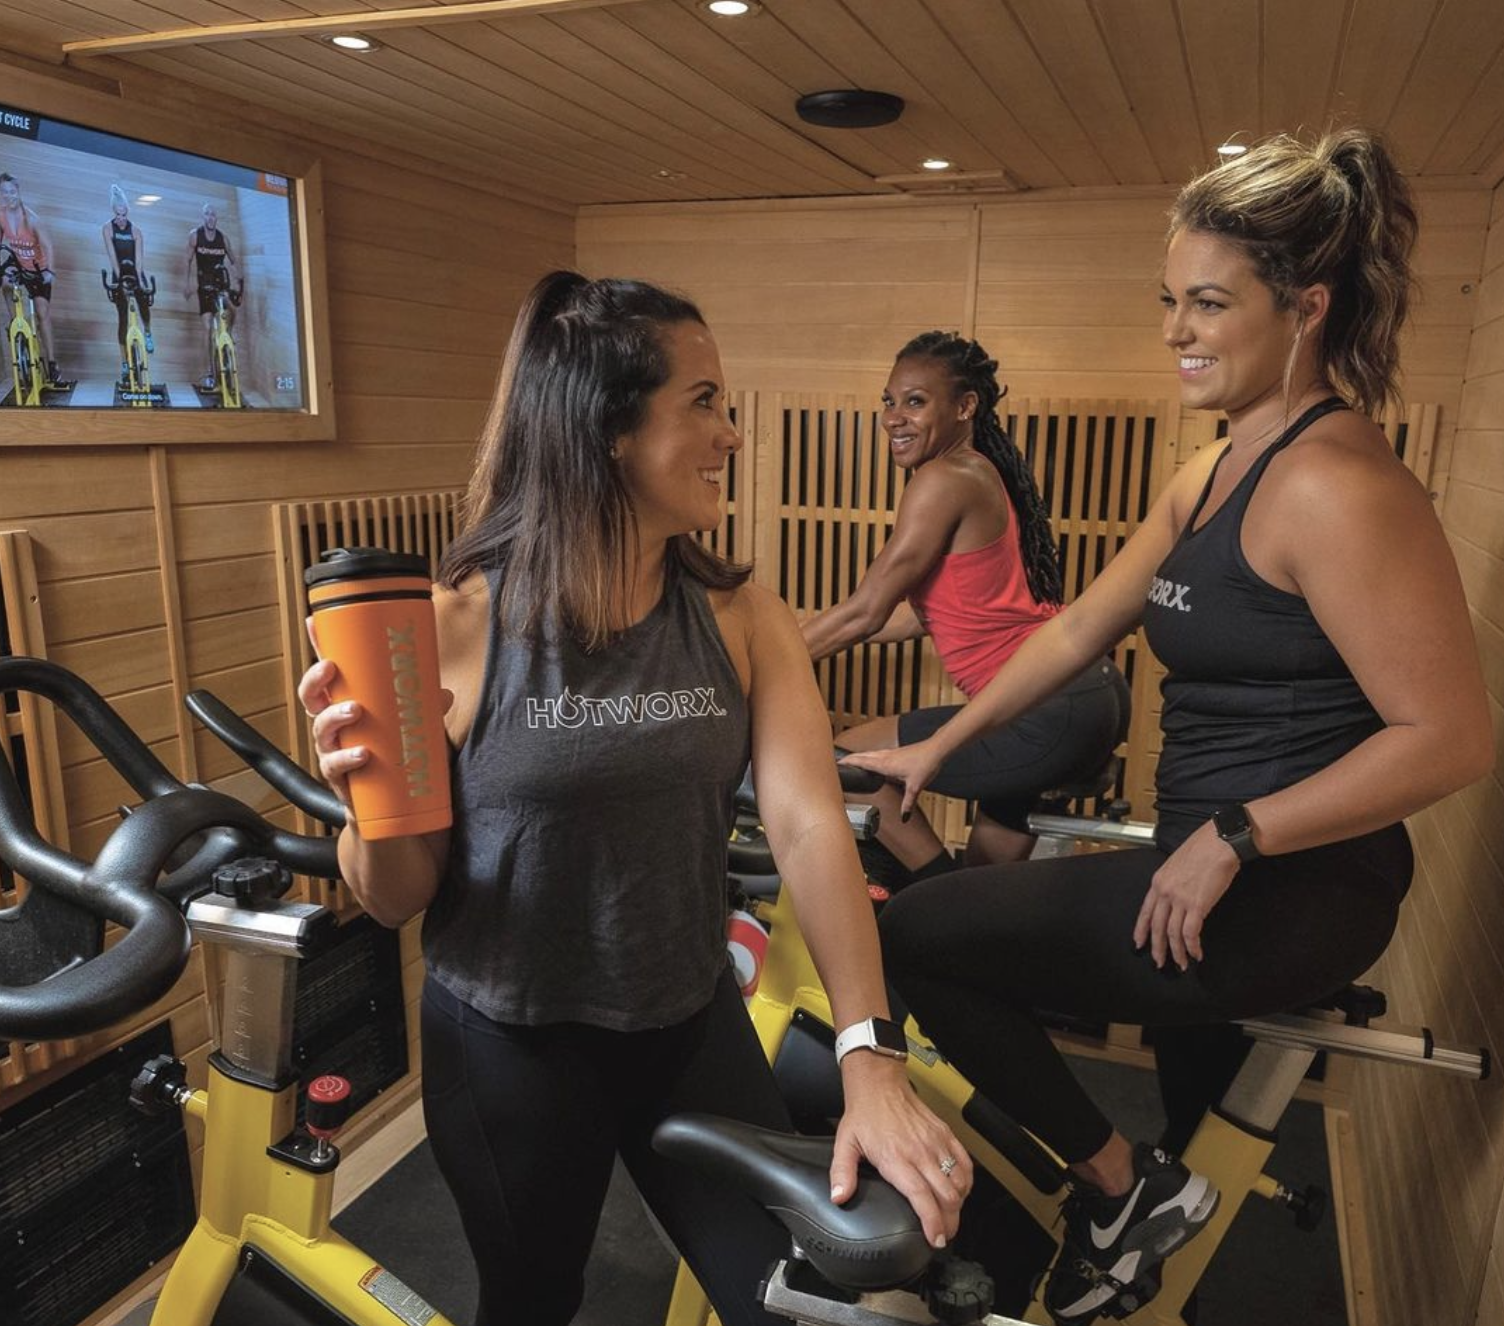 HOTWORX Fitness Studio Joins Mixed-Use Complex “The Dempsey” In